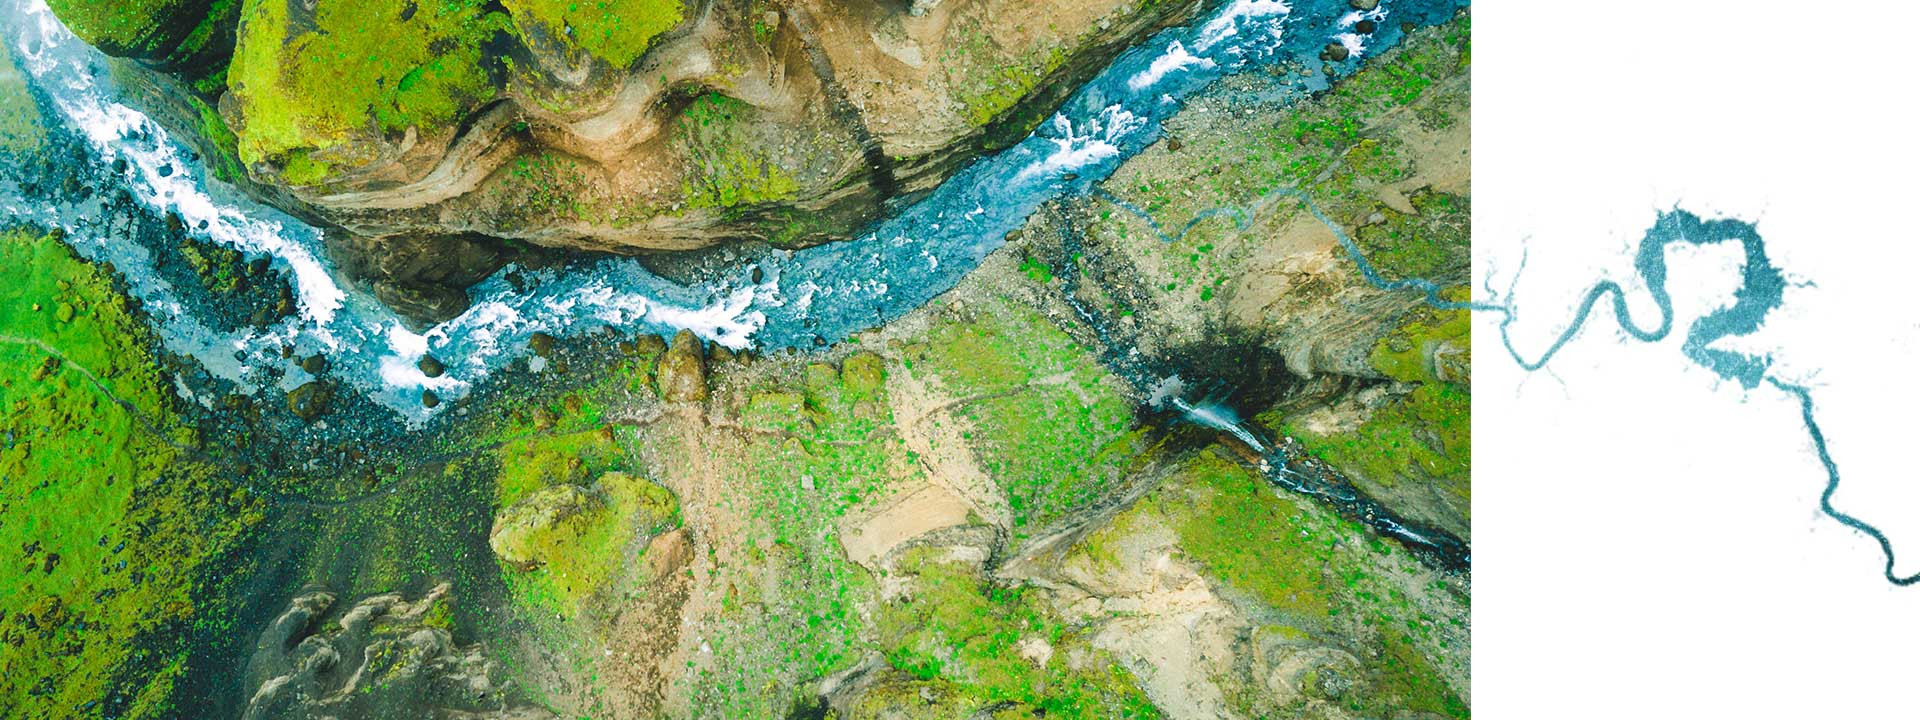 Rivers: the testimony of the Earth’s veins